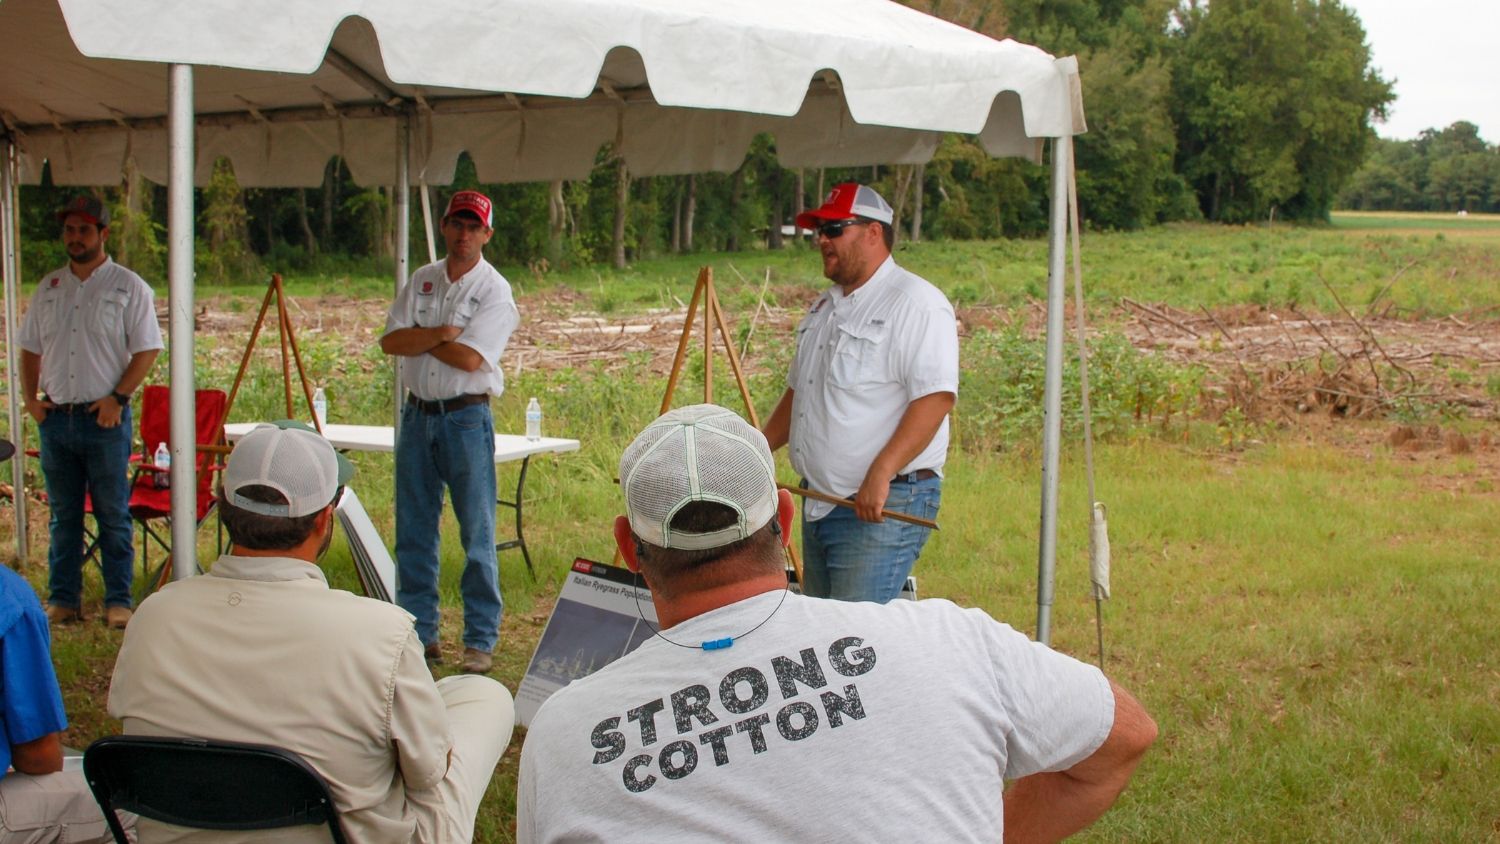 NC State weed science researchers present at a cotton field day